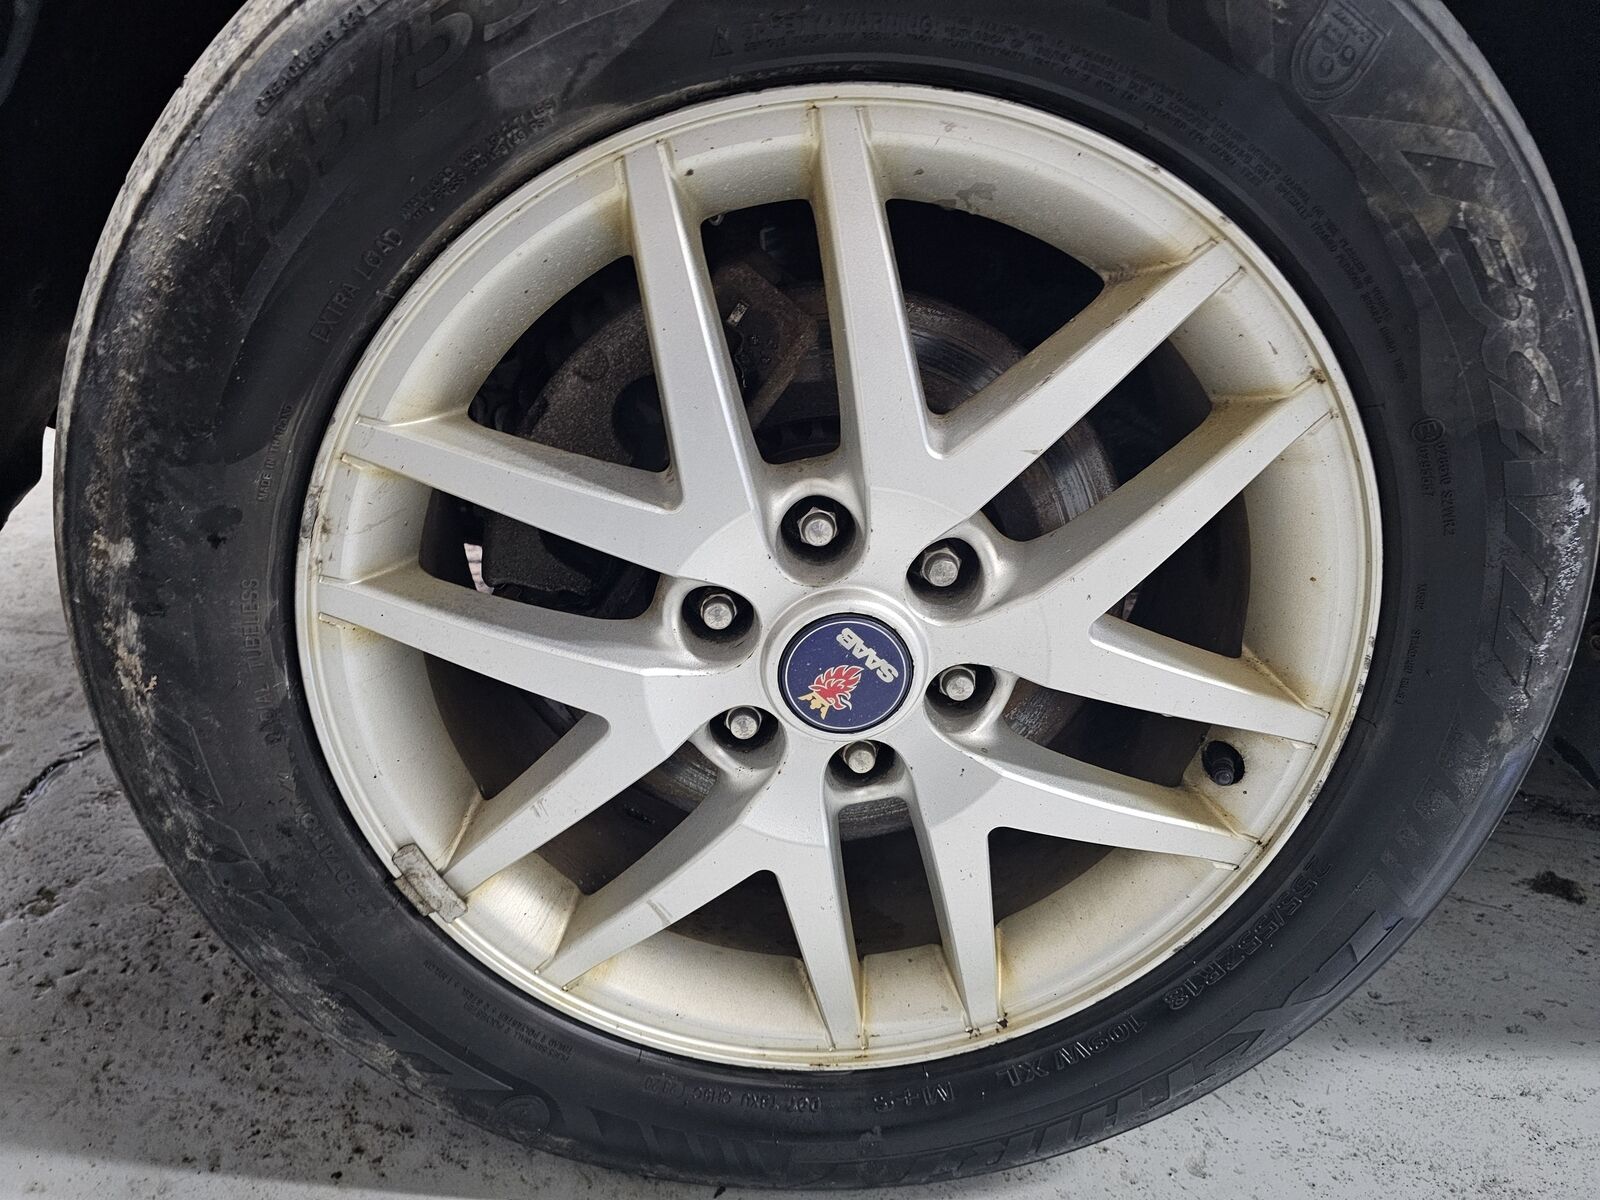 Used Wheel fits: 2005  Saab 9-7x 18x8 alloy 6 Y spokes silver painted opt P4